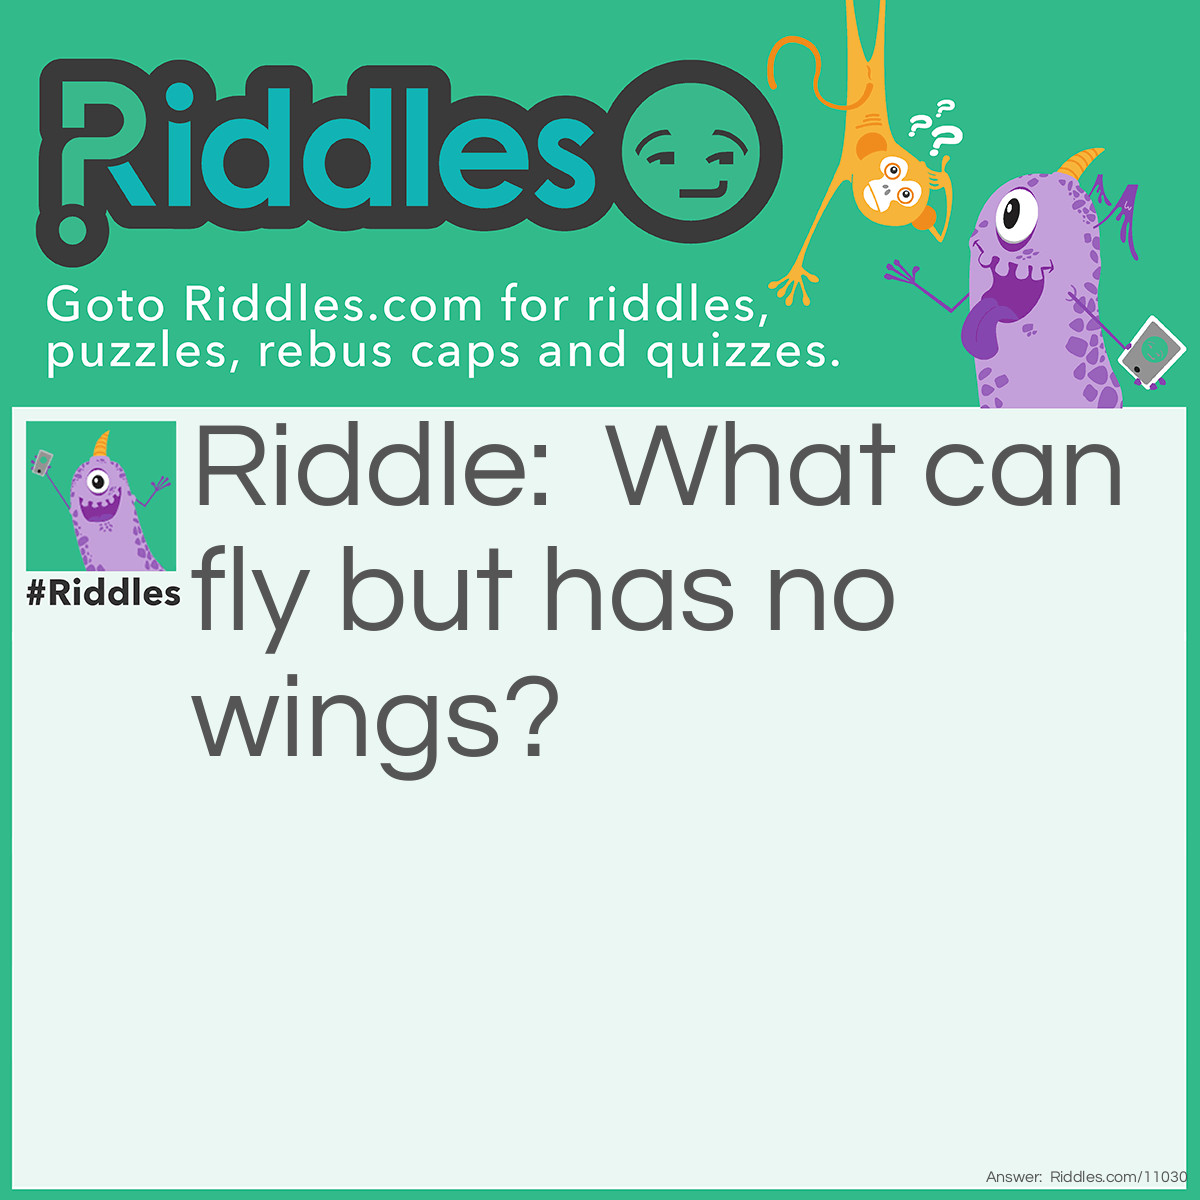 Riddle: What can fly but has no wings? Answer: Time!